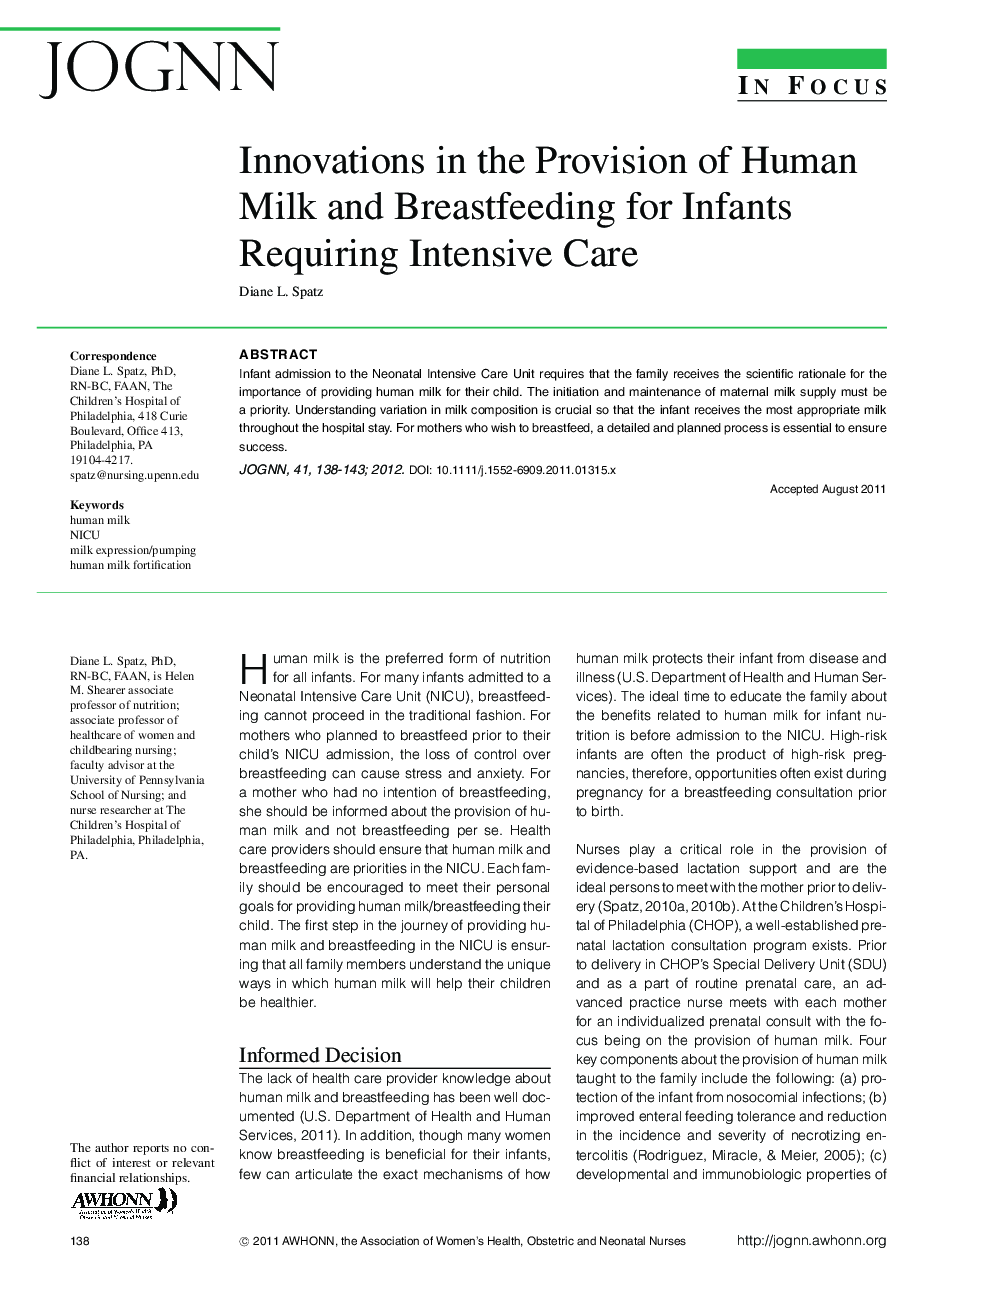 Innovations in the Provision of Human Milk and Breastfeeding for Infants Requiring Intensive Care